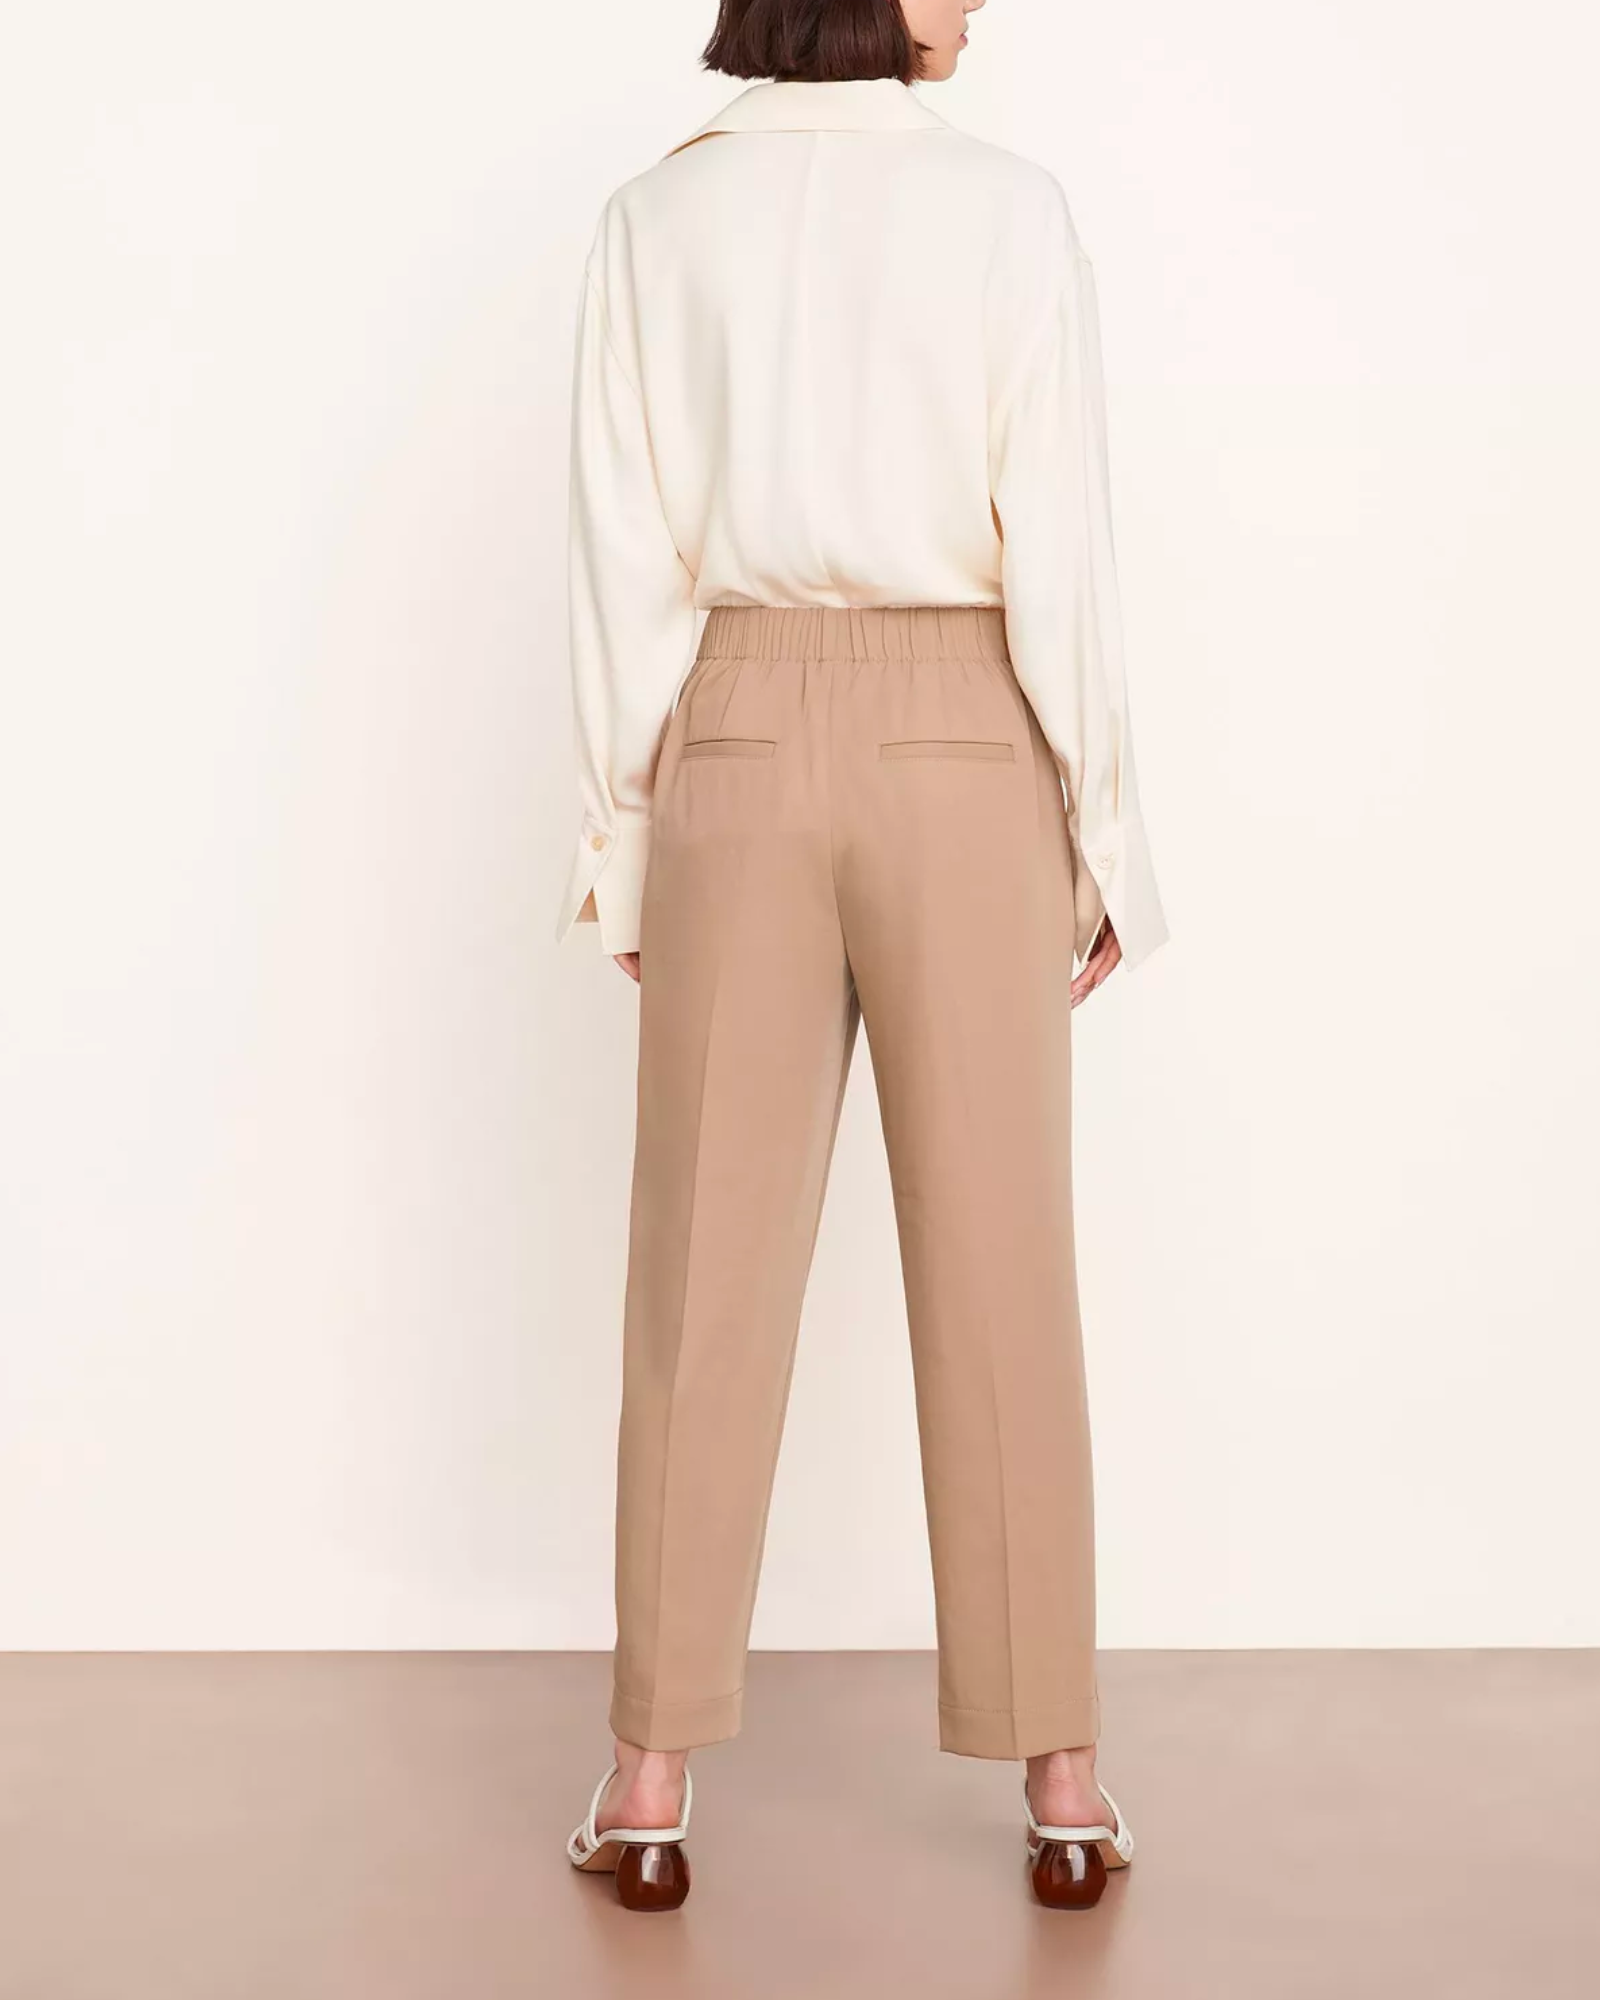 Vince Tapered Pull on Pant in Sandshell